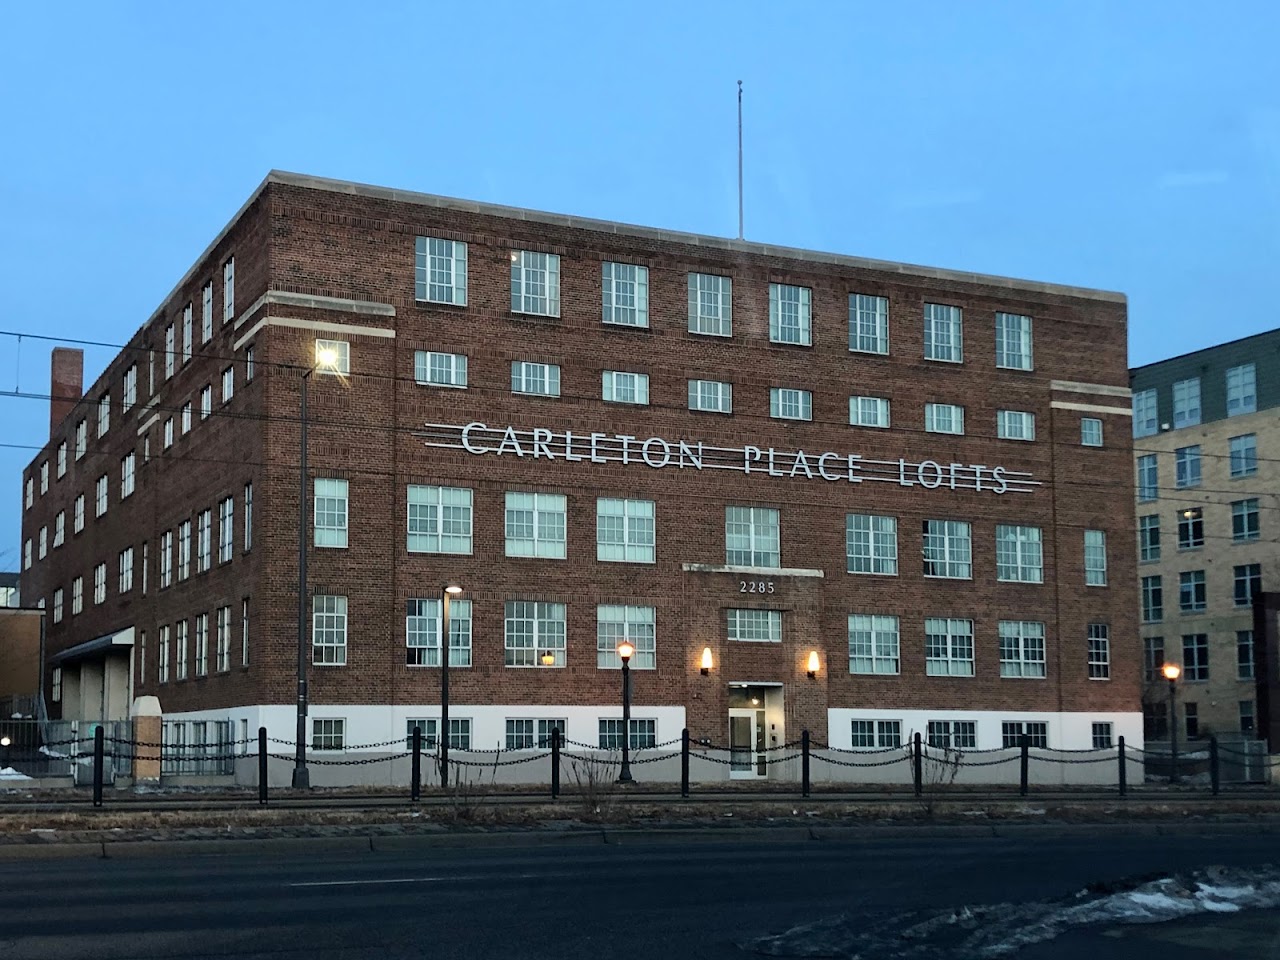 Photo of CARLETON PLACE LOFTS. Affordable housing located at 2285 UNIVERSITY AVENUE WEST SAINT PAUL, MN 55114